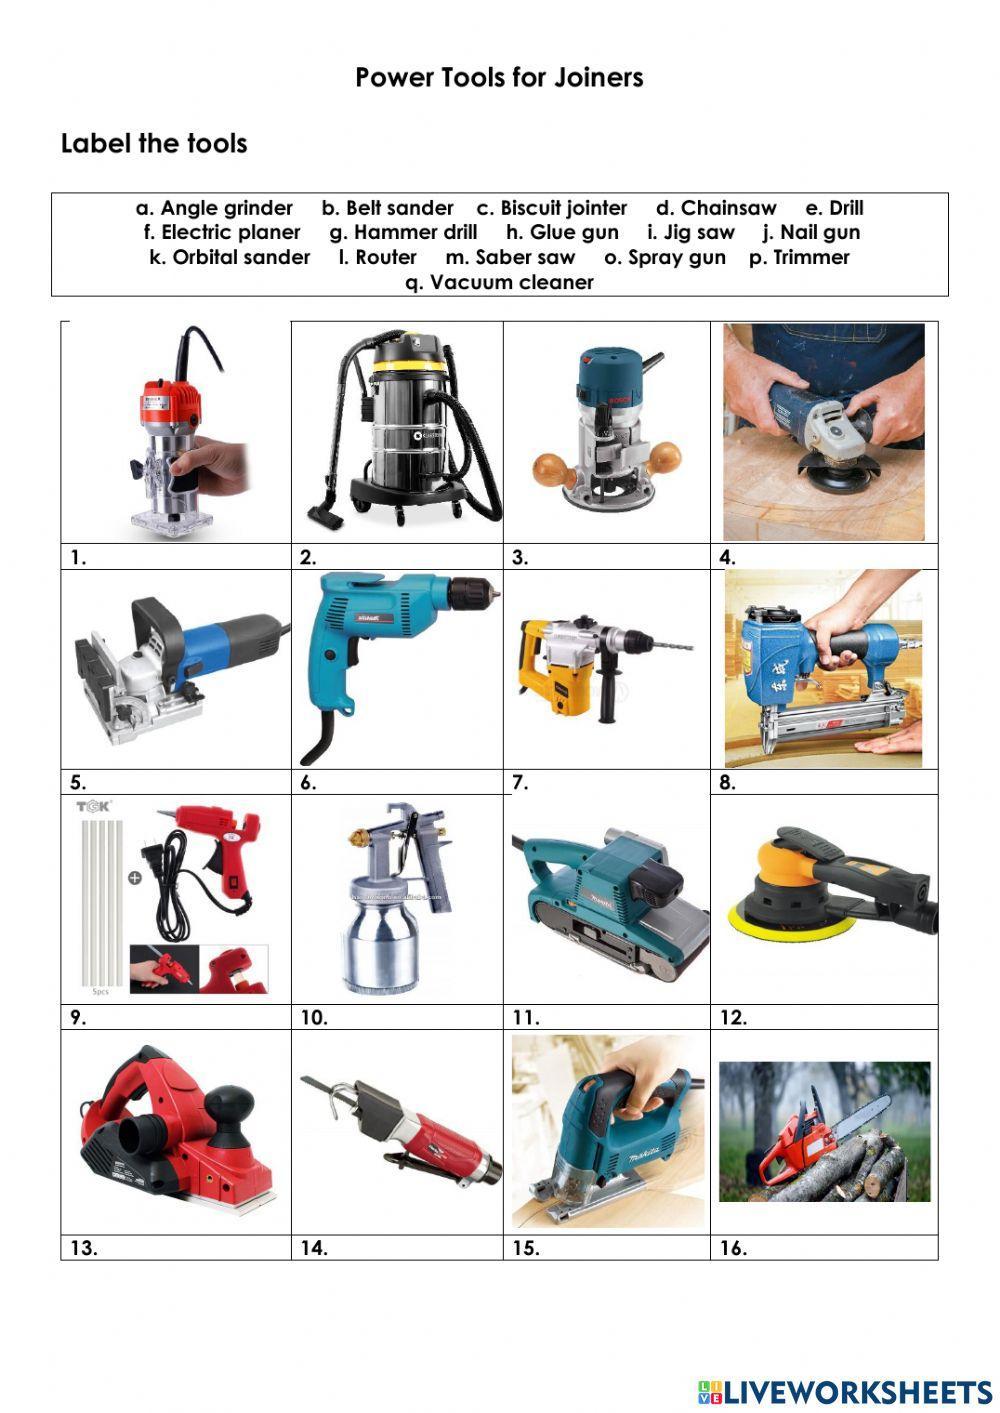 Power tools for Joiners